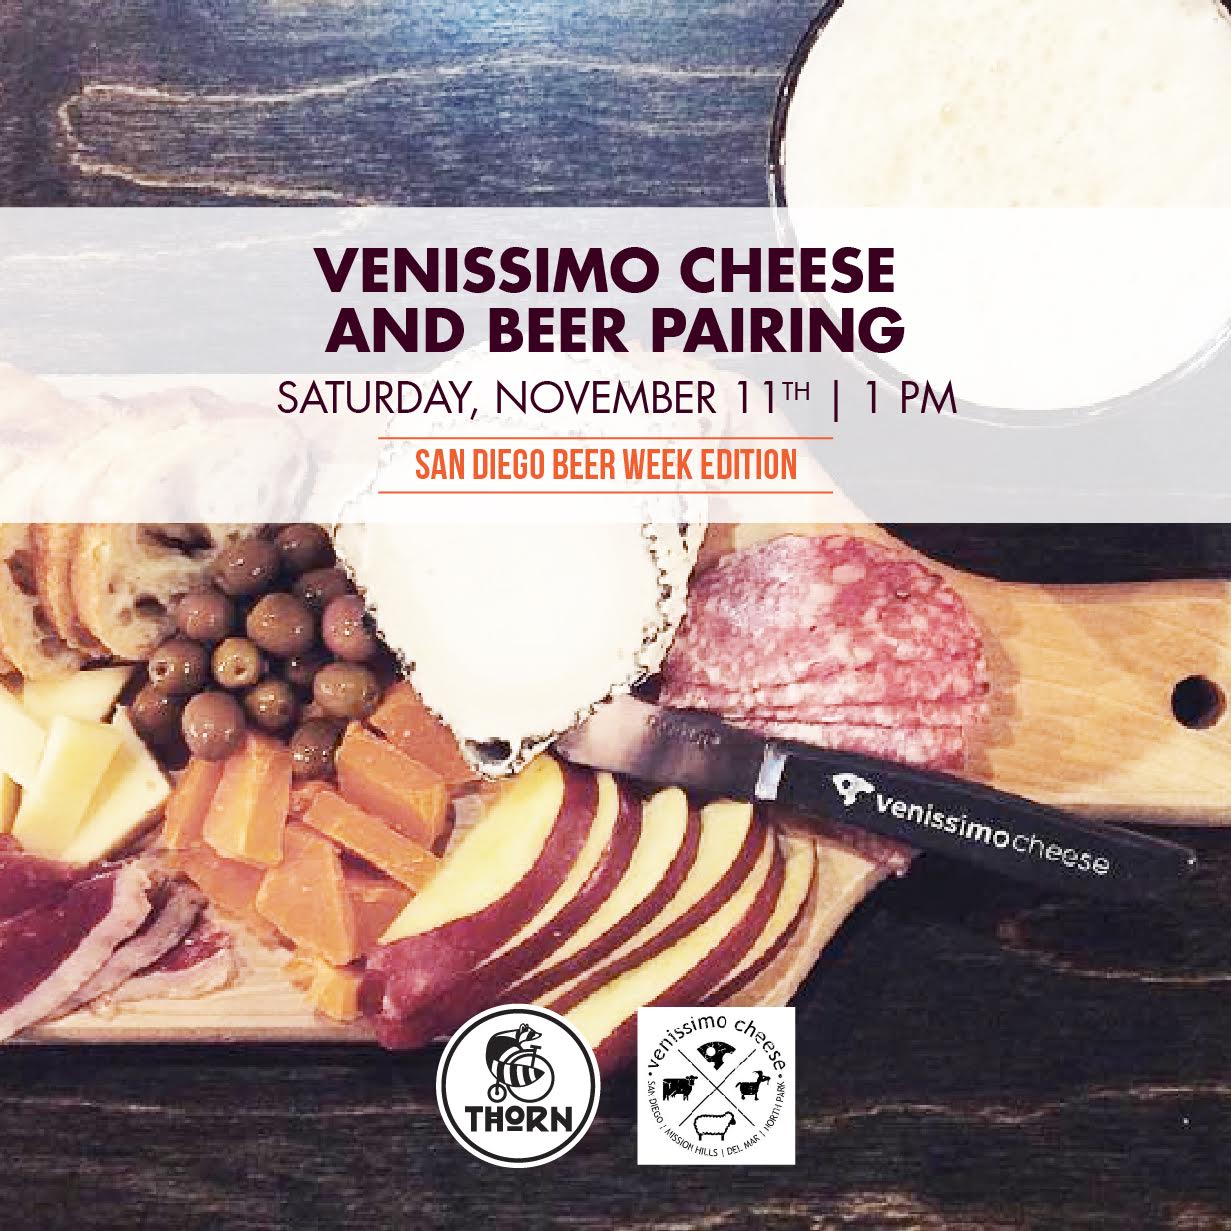 Venissimo Cheese & Beer Pairing at Thorn St Brewing in North Park SD for San Diego Beer Week